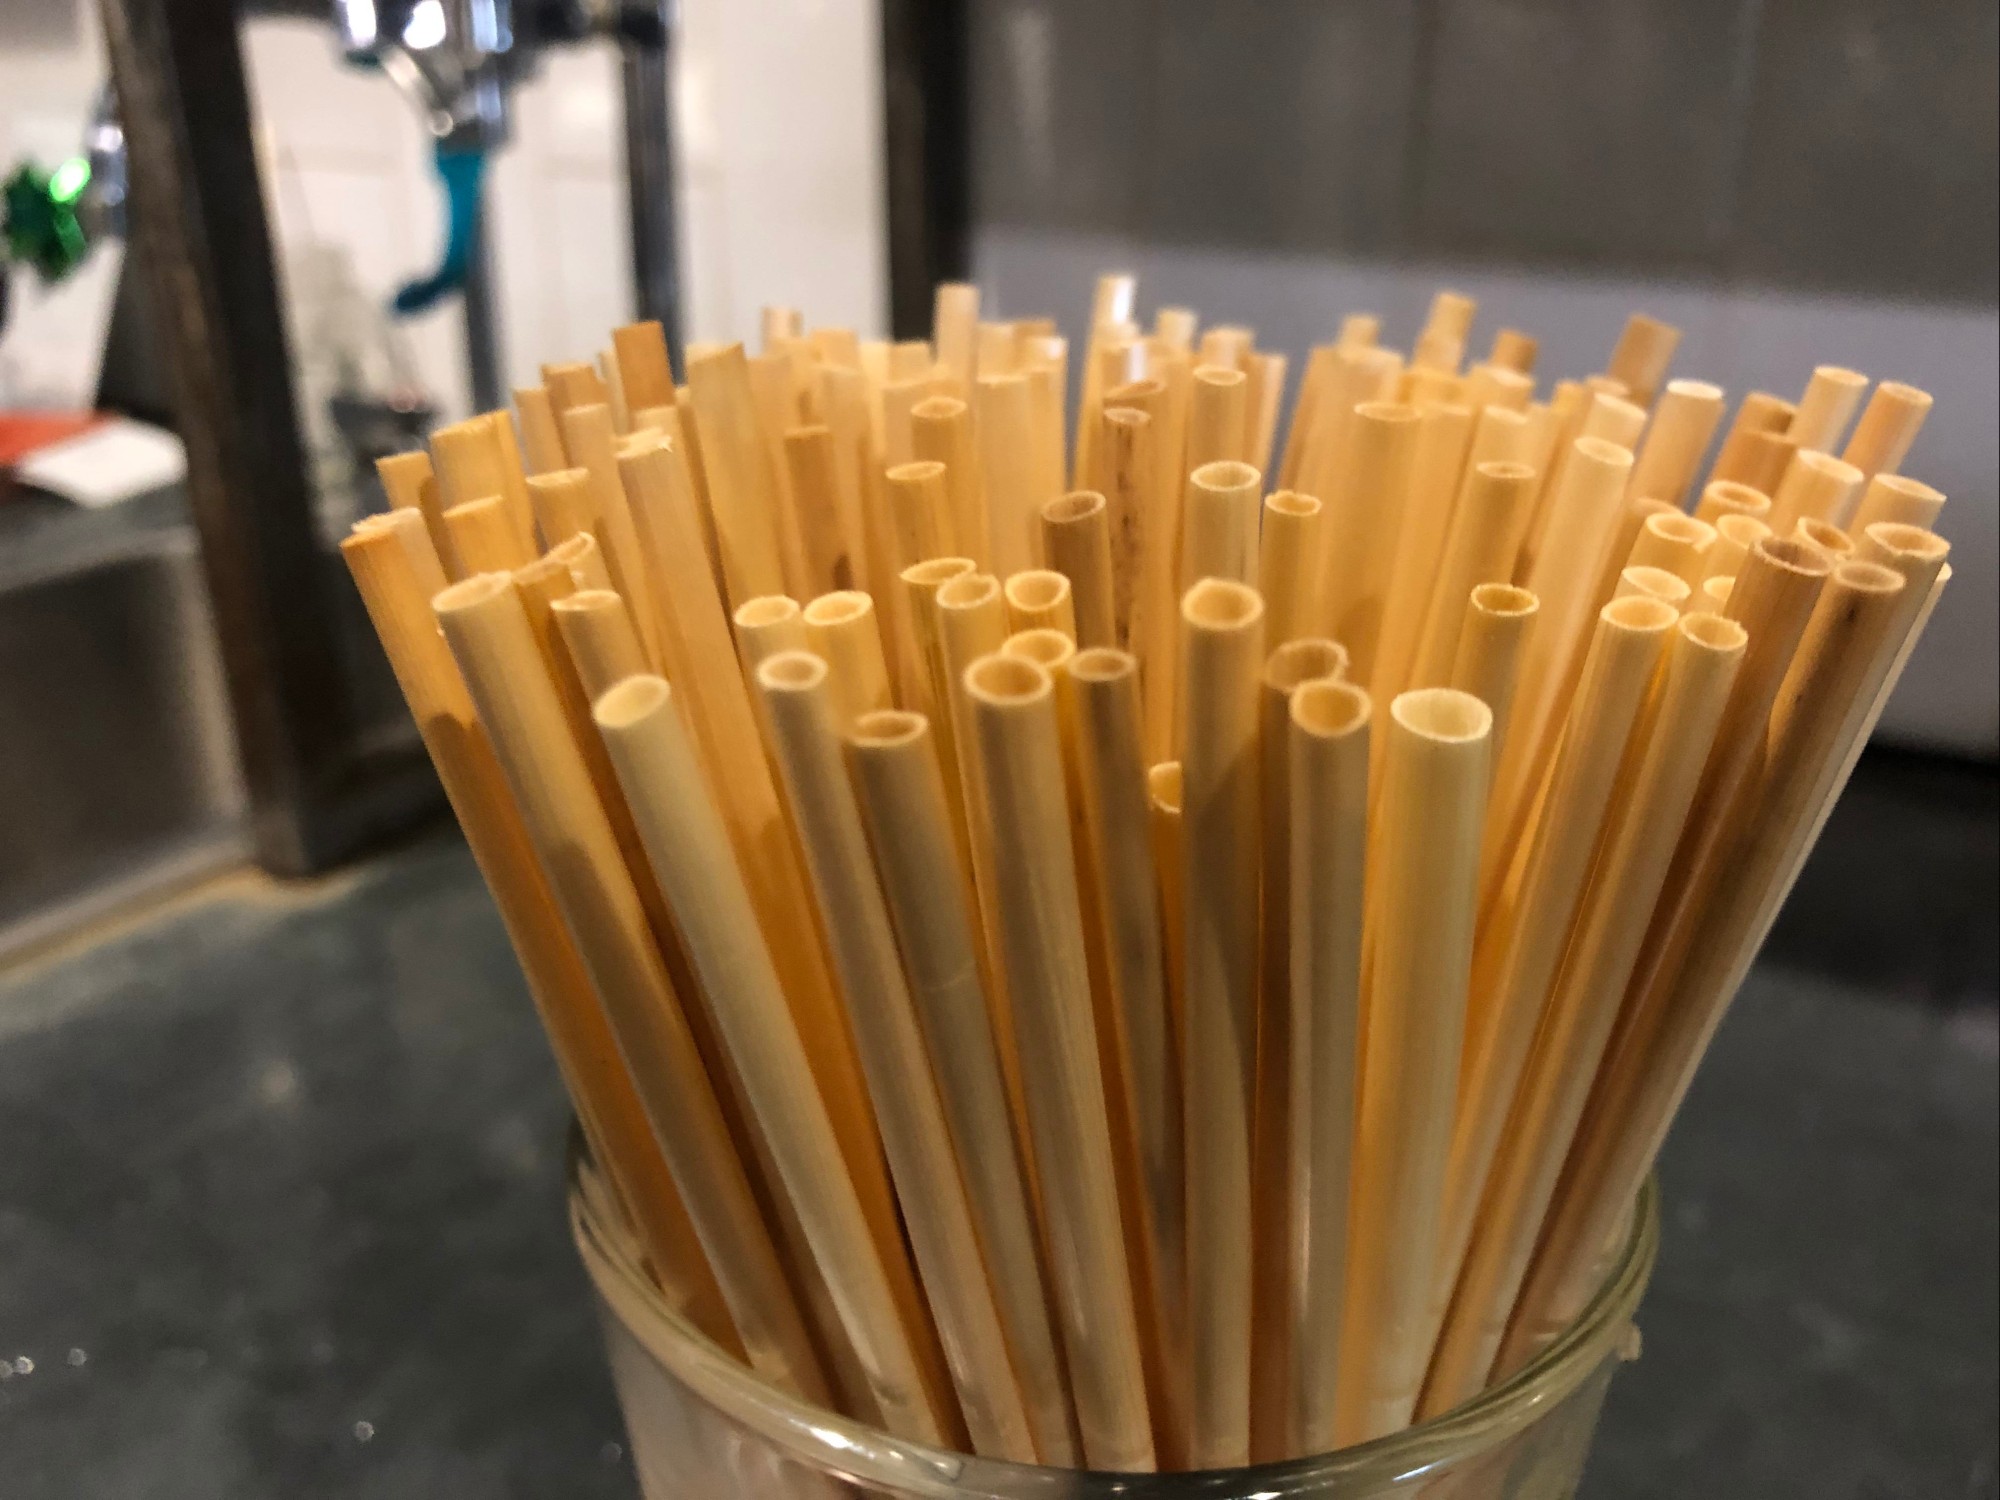 First Watch is switching to plant-based straws